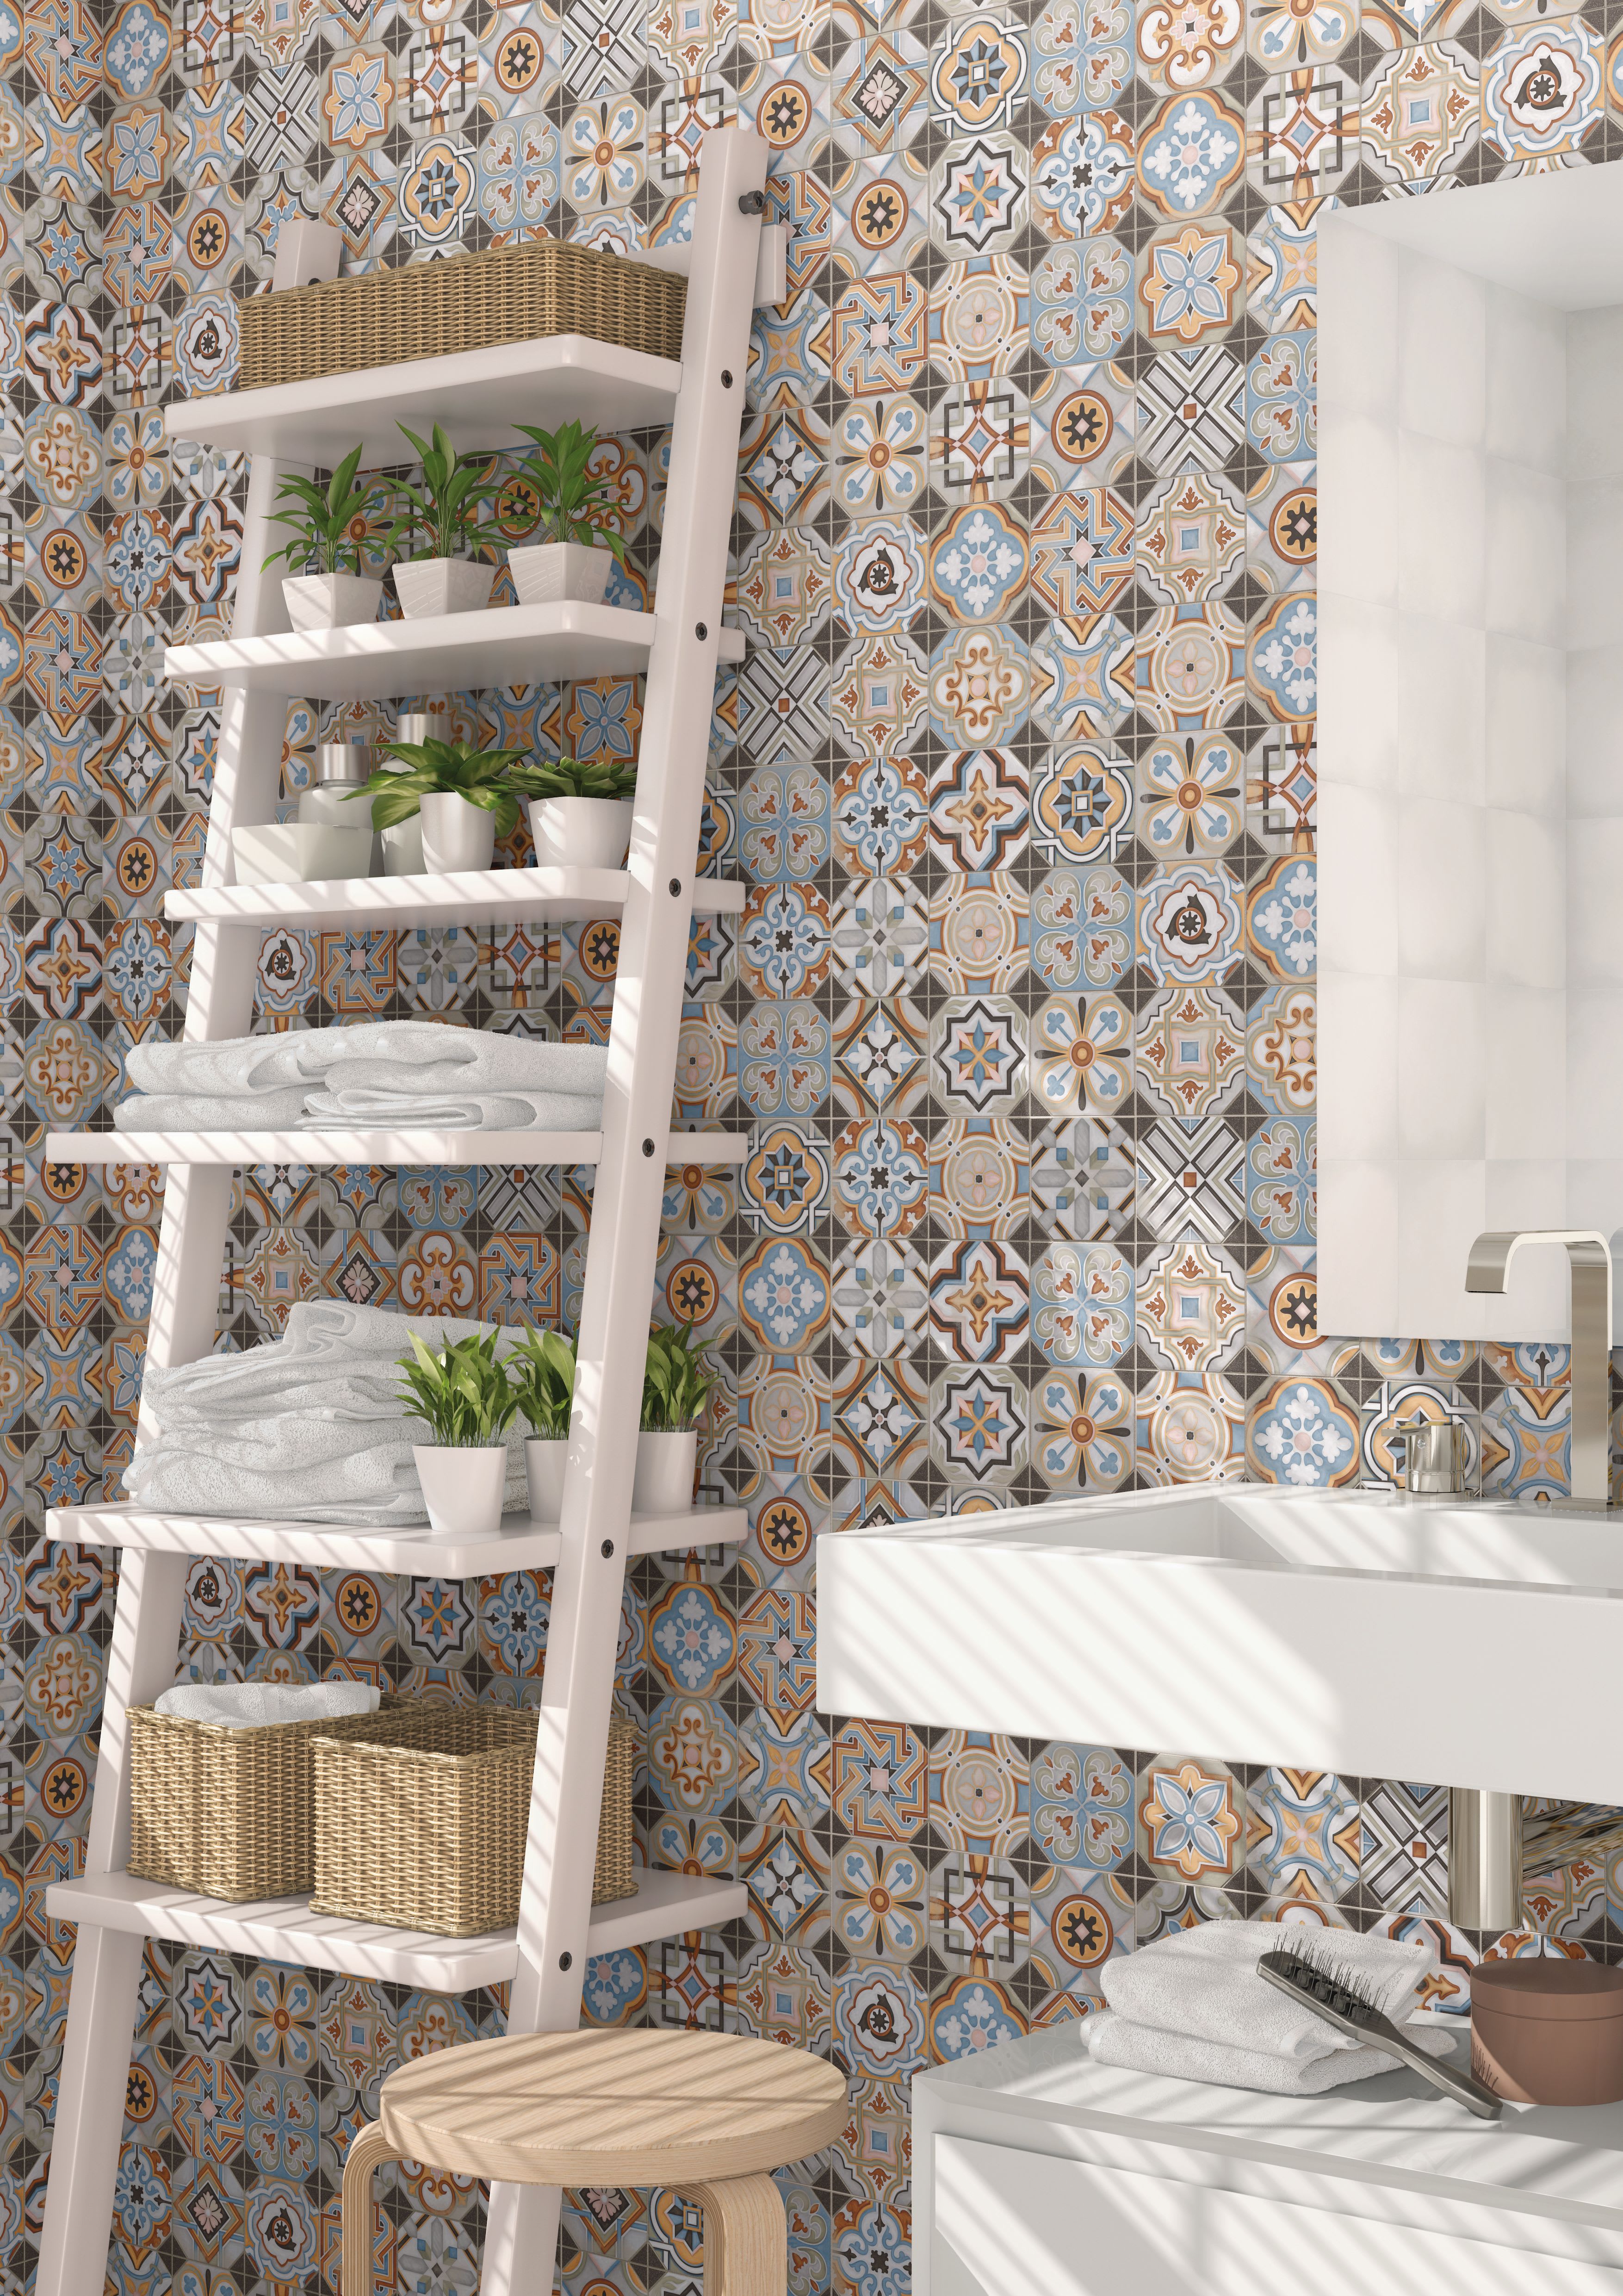 Wickes Central Park Patterned Ceramic Wall & Floor